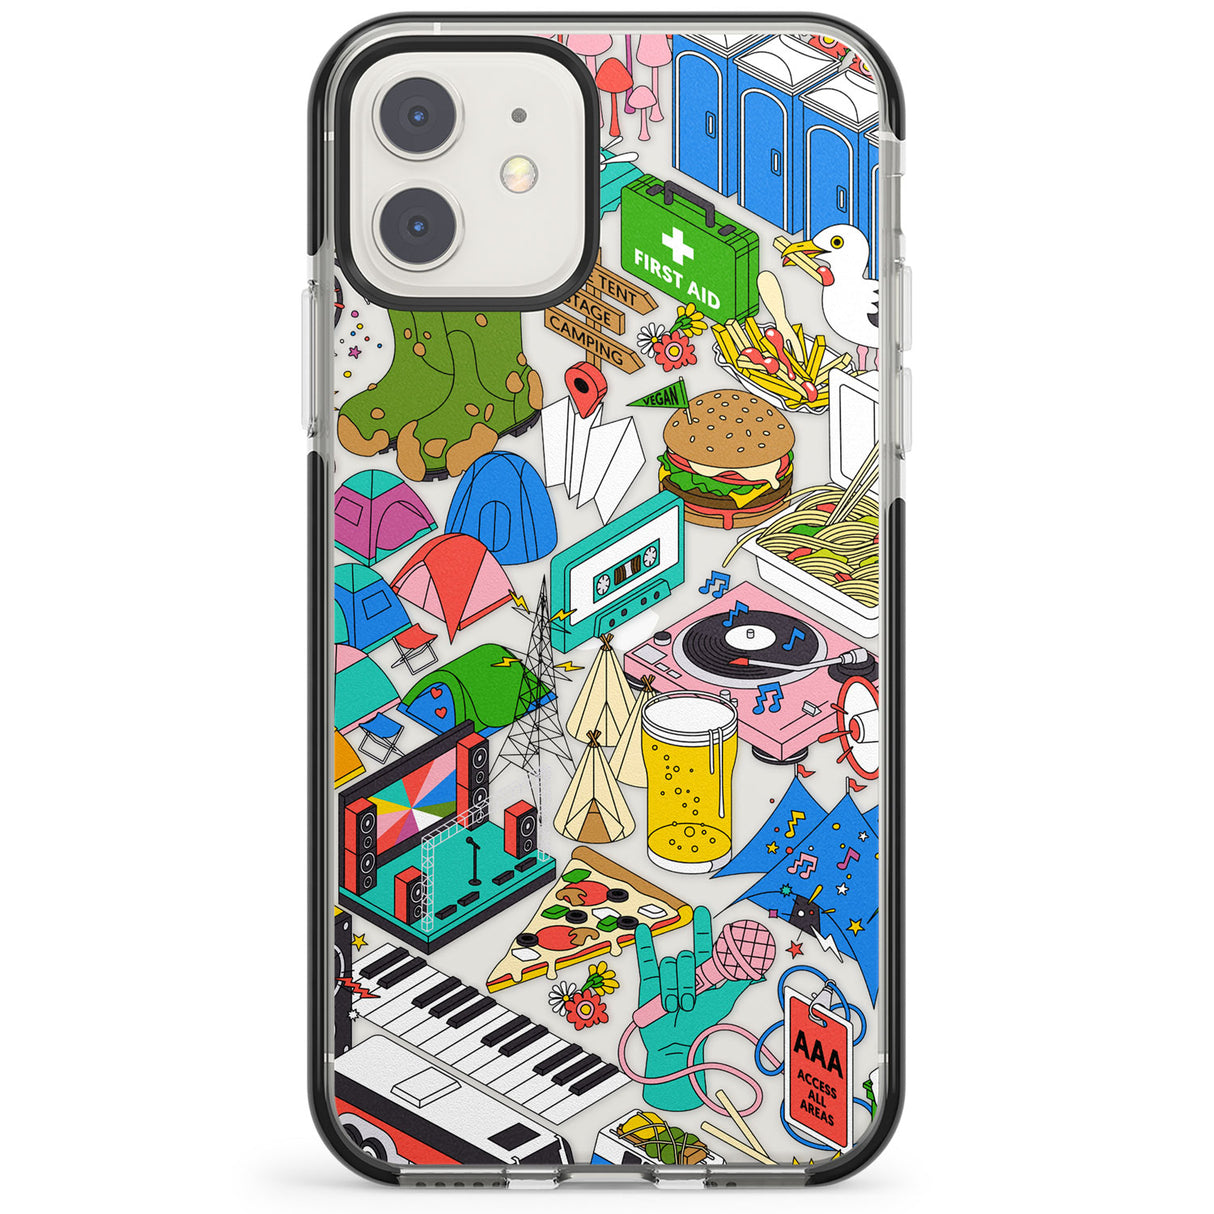 Festival Frenzy Impact Phone Case for iPhone 11, iphone 12